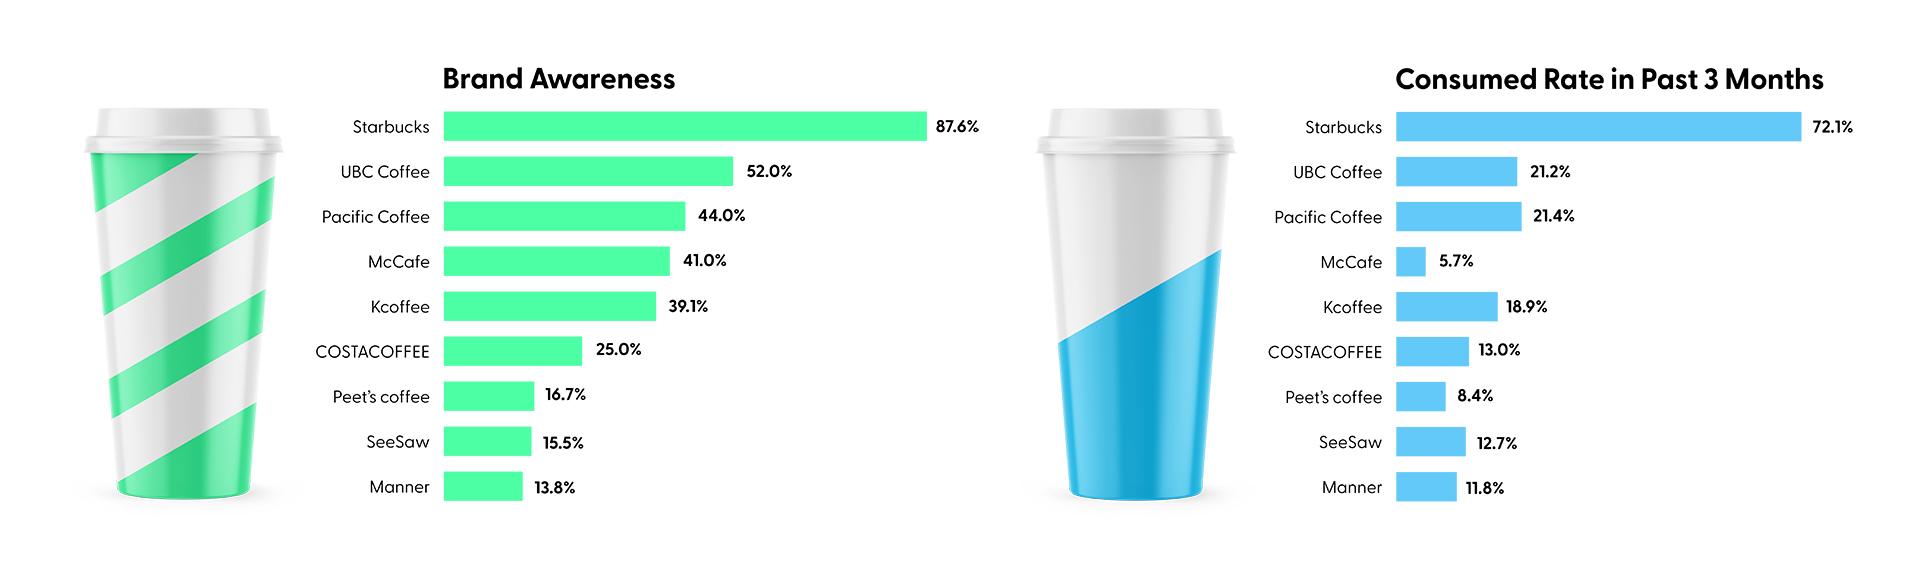 Young Consumers are Creating the Buzz for Coffee in China, Chart 1 - Freshly-Brewed Coffee, Brand Awareness and Consumed Rate in Past 3 Months | Toluna